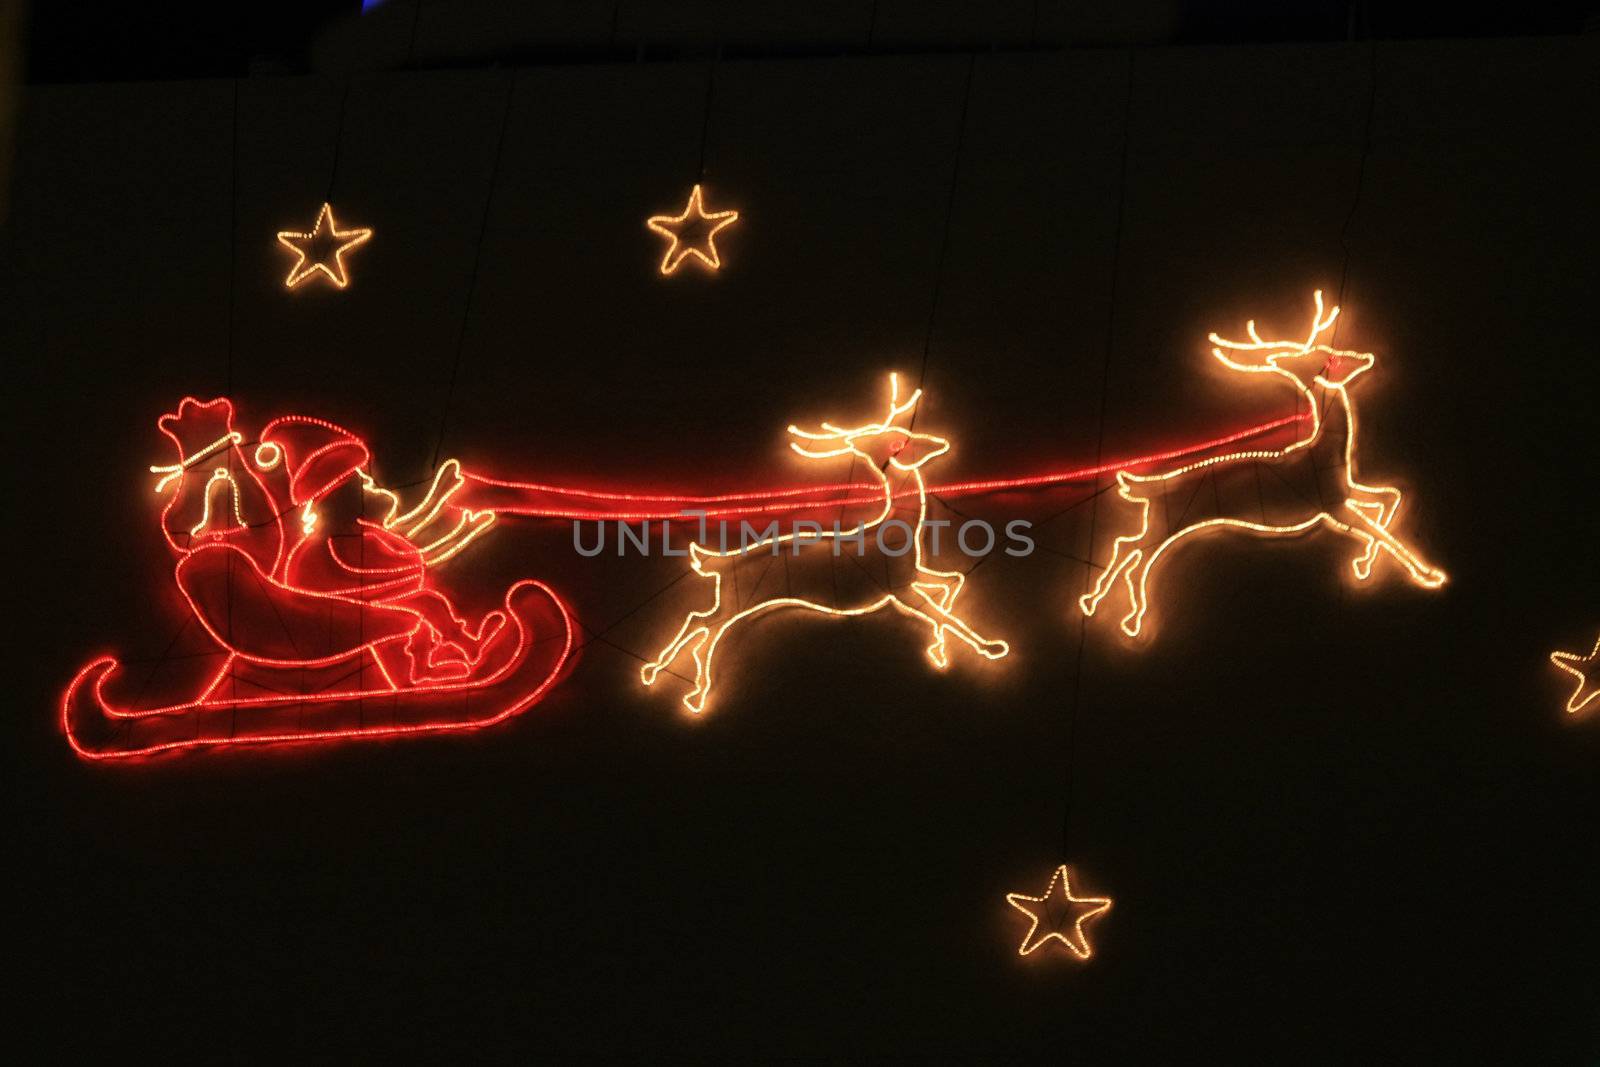 A holiday decoration lightning, santa claus and his sleigh